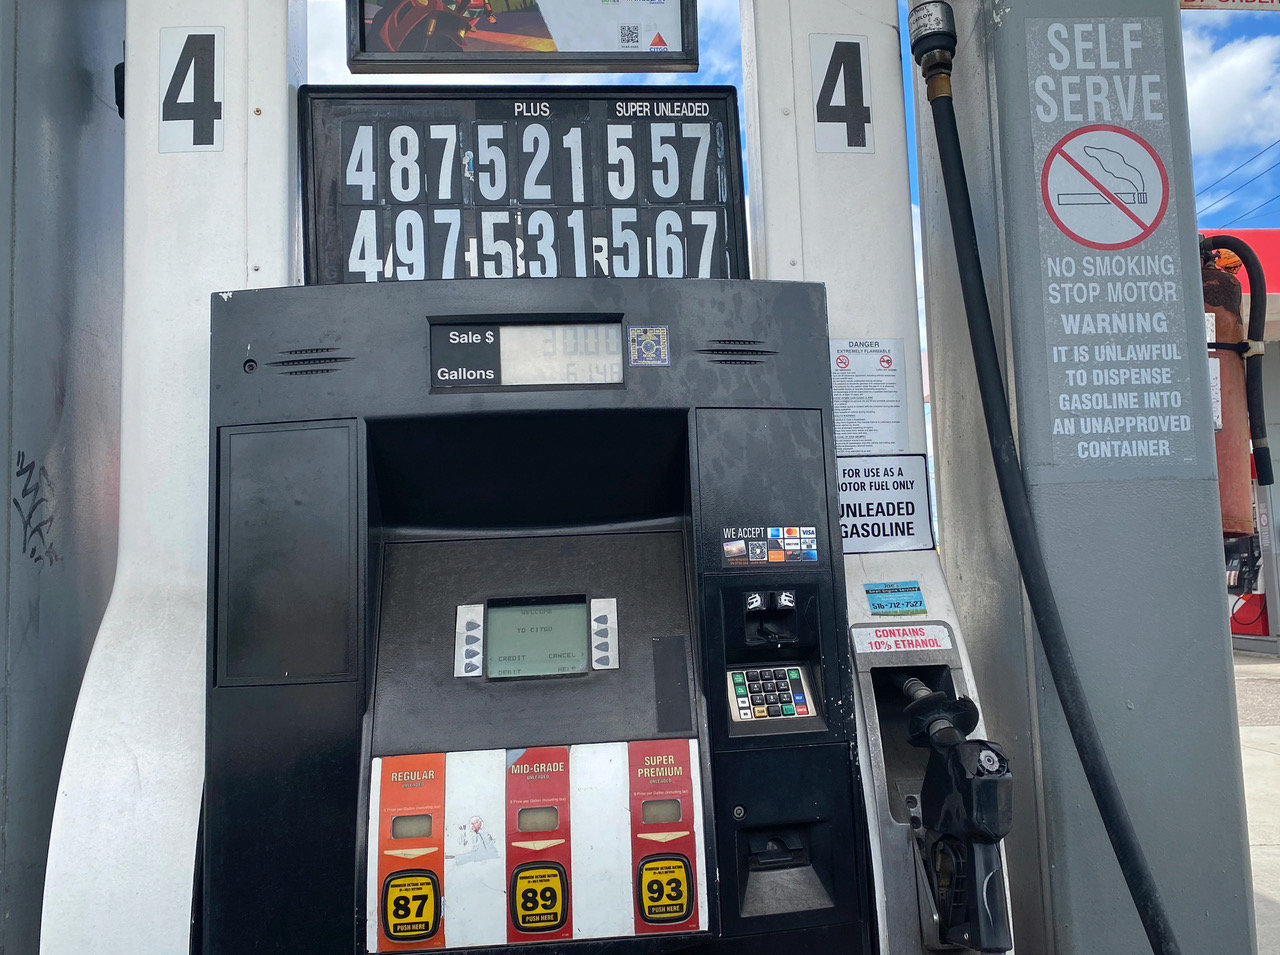 Elmont residents said they were routinely paying double what they normally spend to fill up their vehicles amid the rise in gas prices.